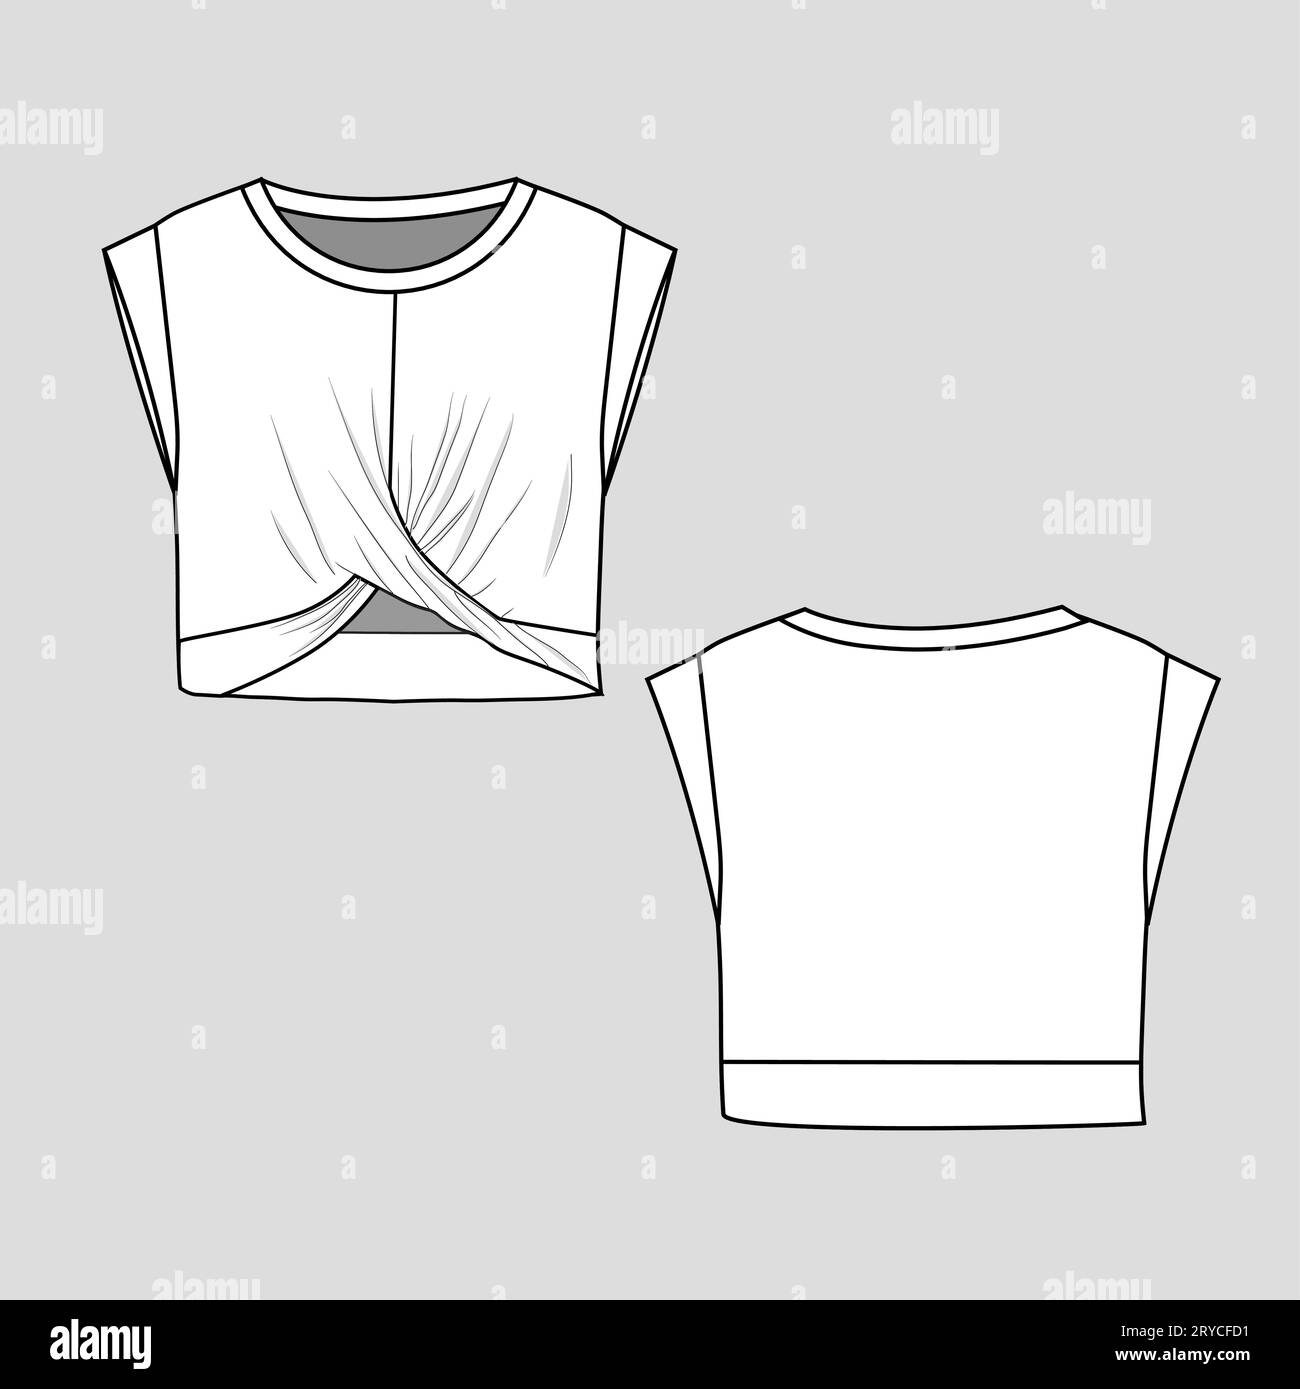 Women front twist crop top t-shirt round neck Cap sleeve  fashion knot blouse flat sketch technical drawing template cad mock up deign vector Stock Vector